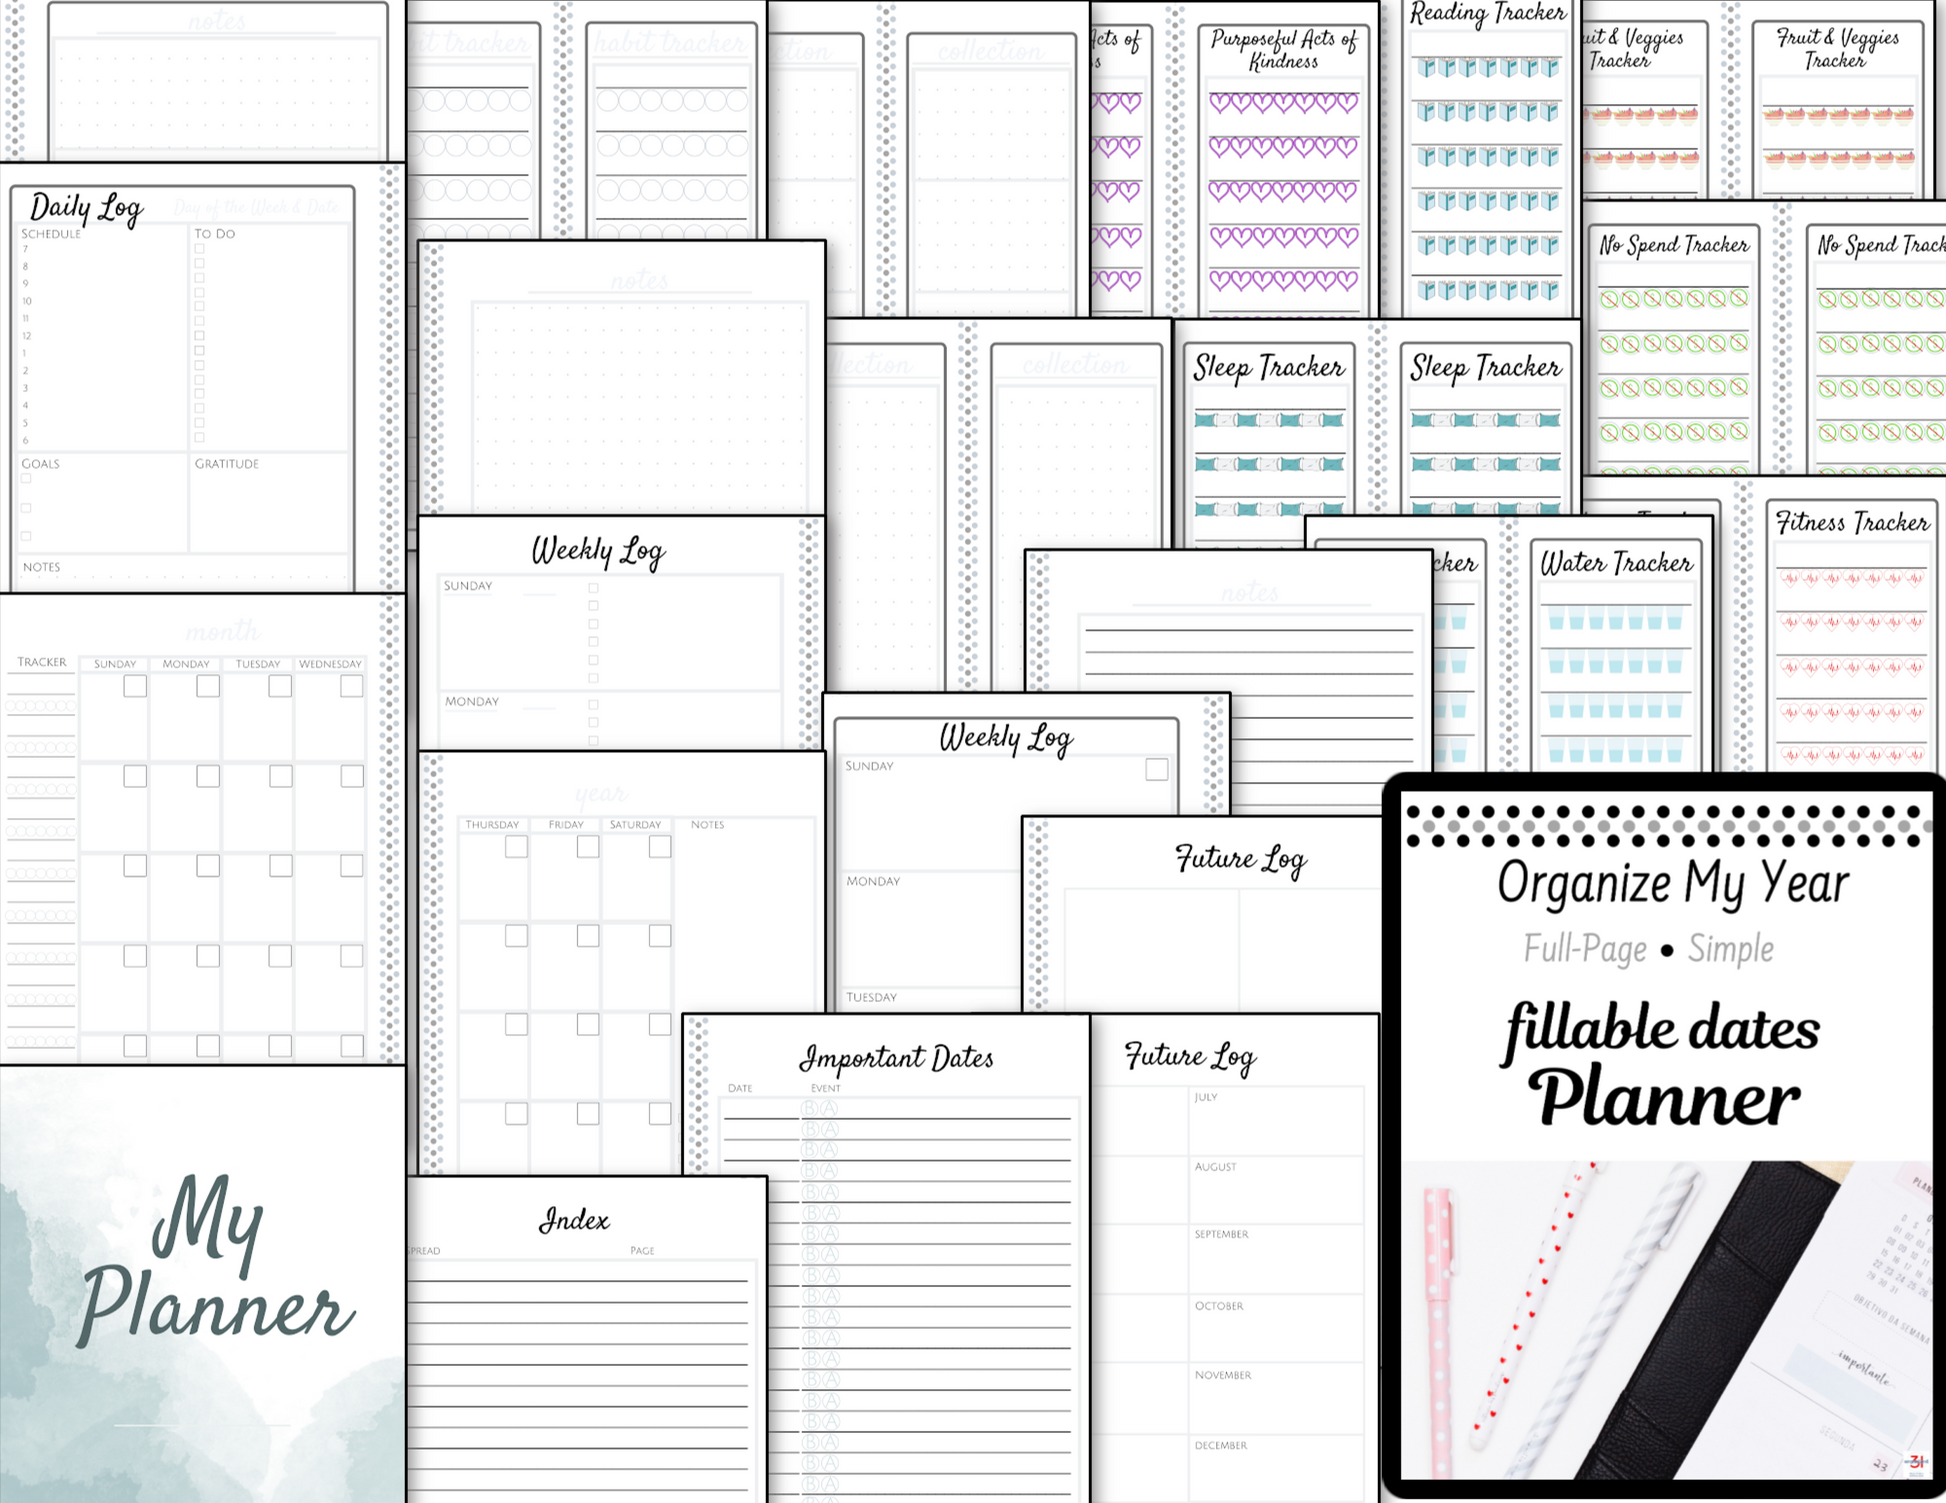 A variety of Fillable Printable Planners and Fillable Printable Planners in a variety of colors. (Brand: Organized 31 Shop)